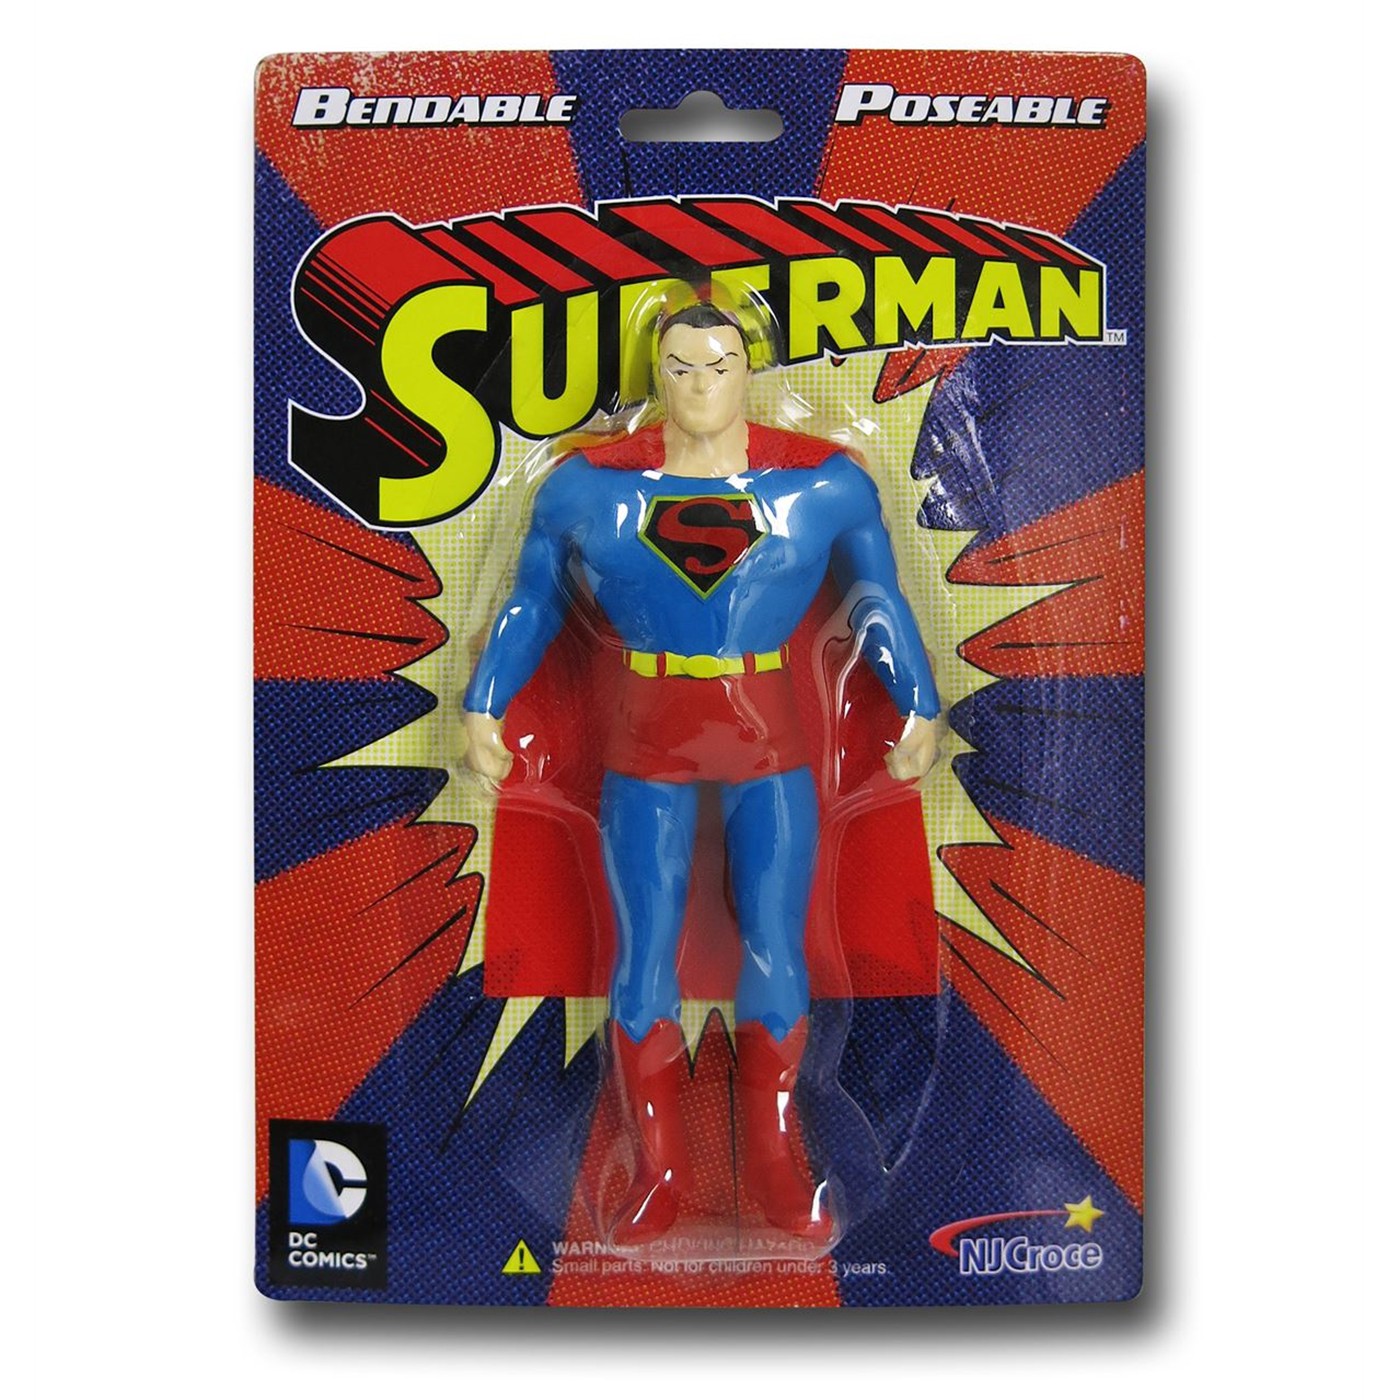 Superman Classic Bendable and Poseable Action Figure